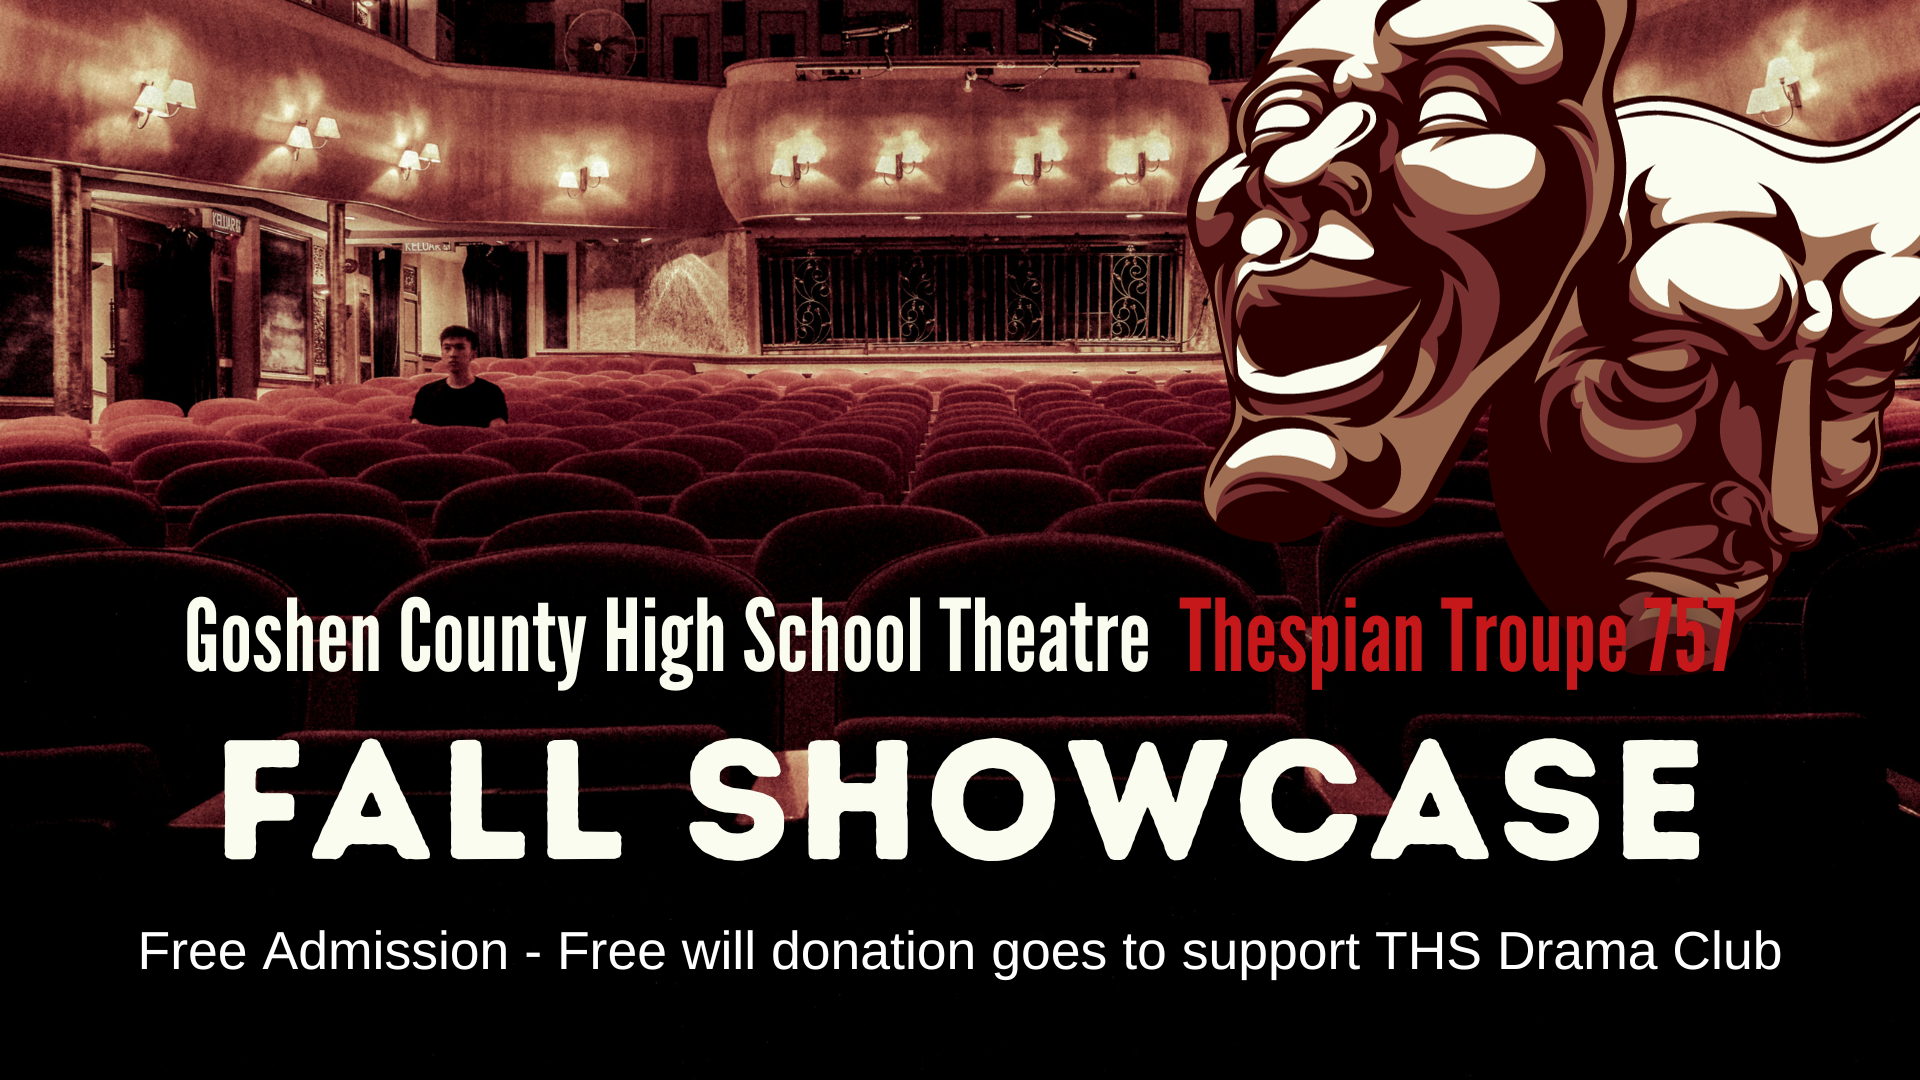 a flyer for Goshen County High School Theatre Thespian Troupe 2023 Fall Showcase